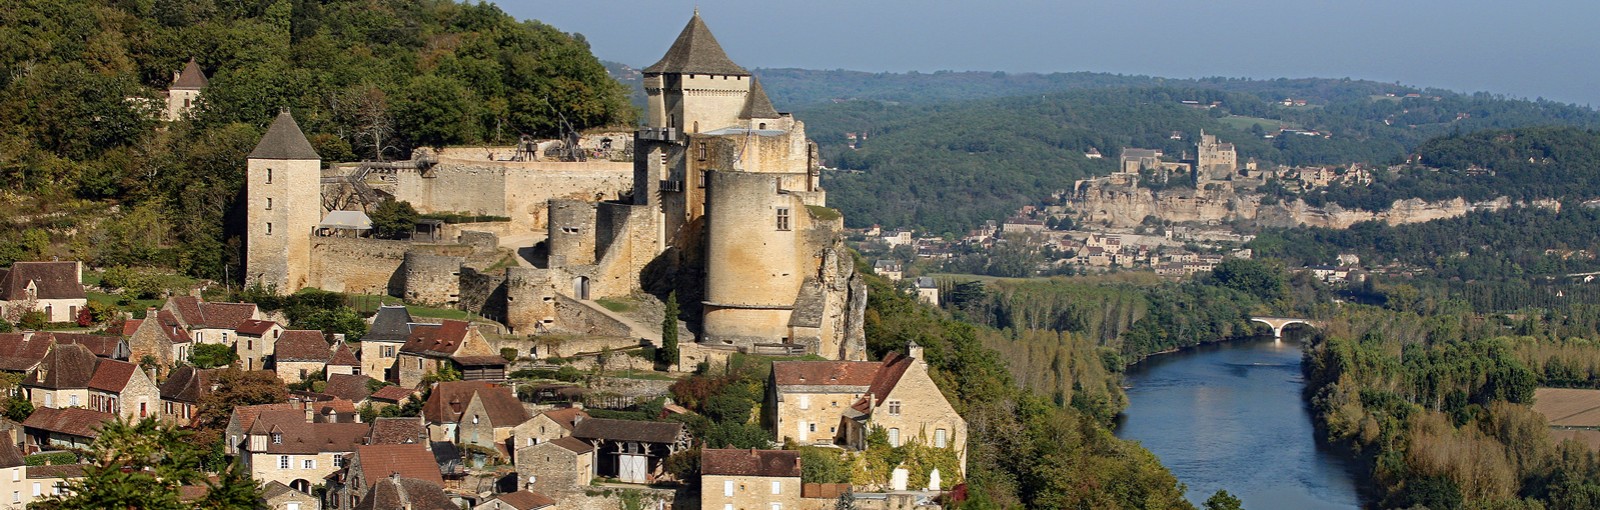 Tours Private day tours from Sarlat - Dordoña y Burdeos - TOURS REGIONALES